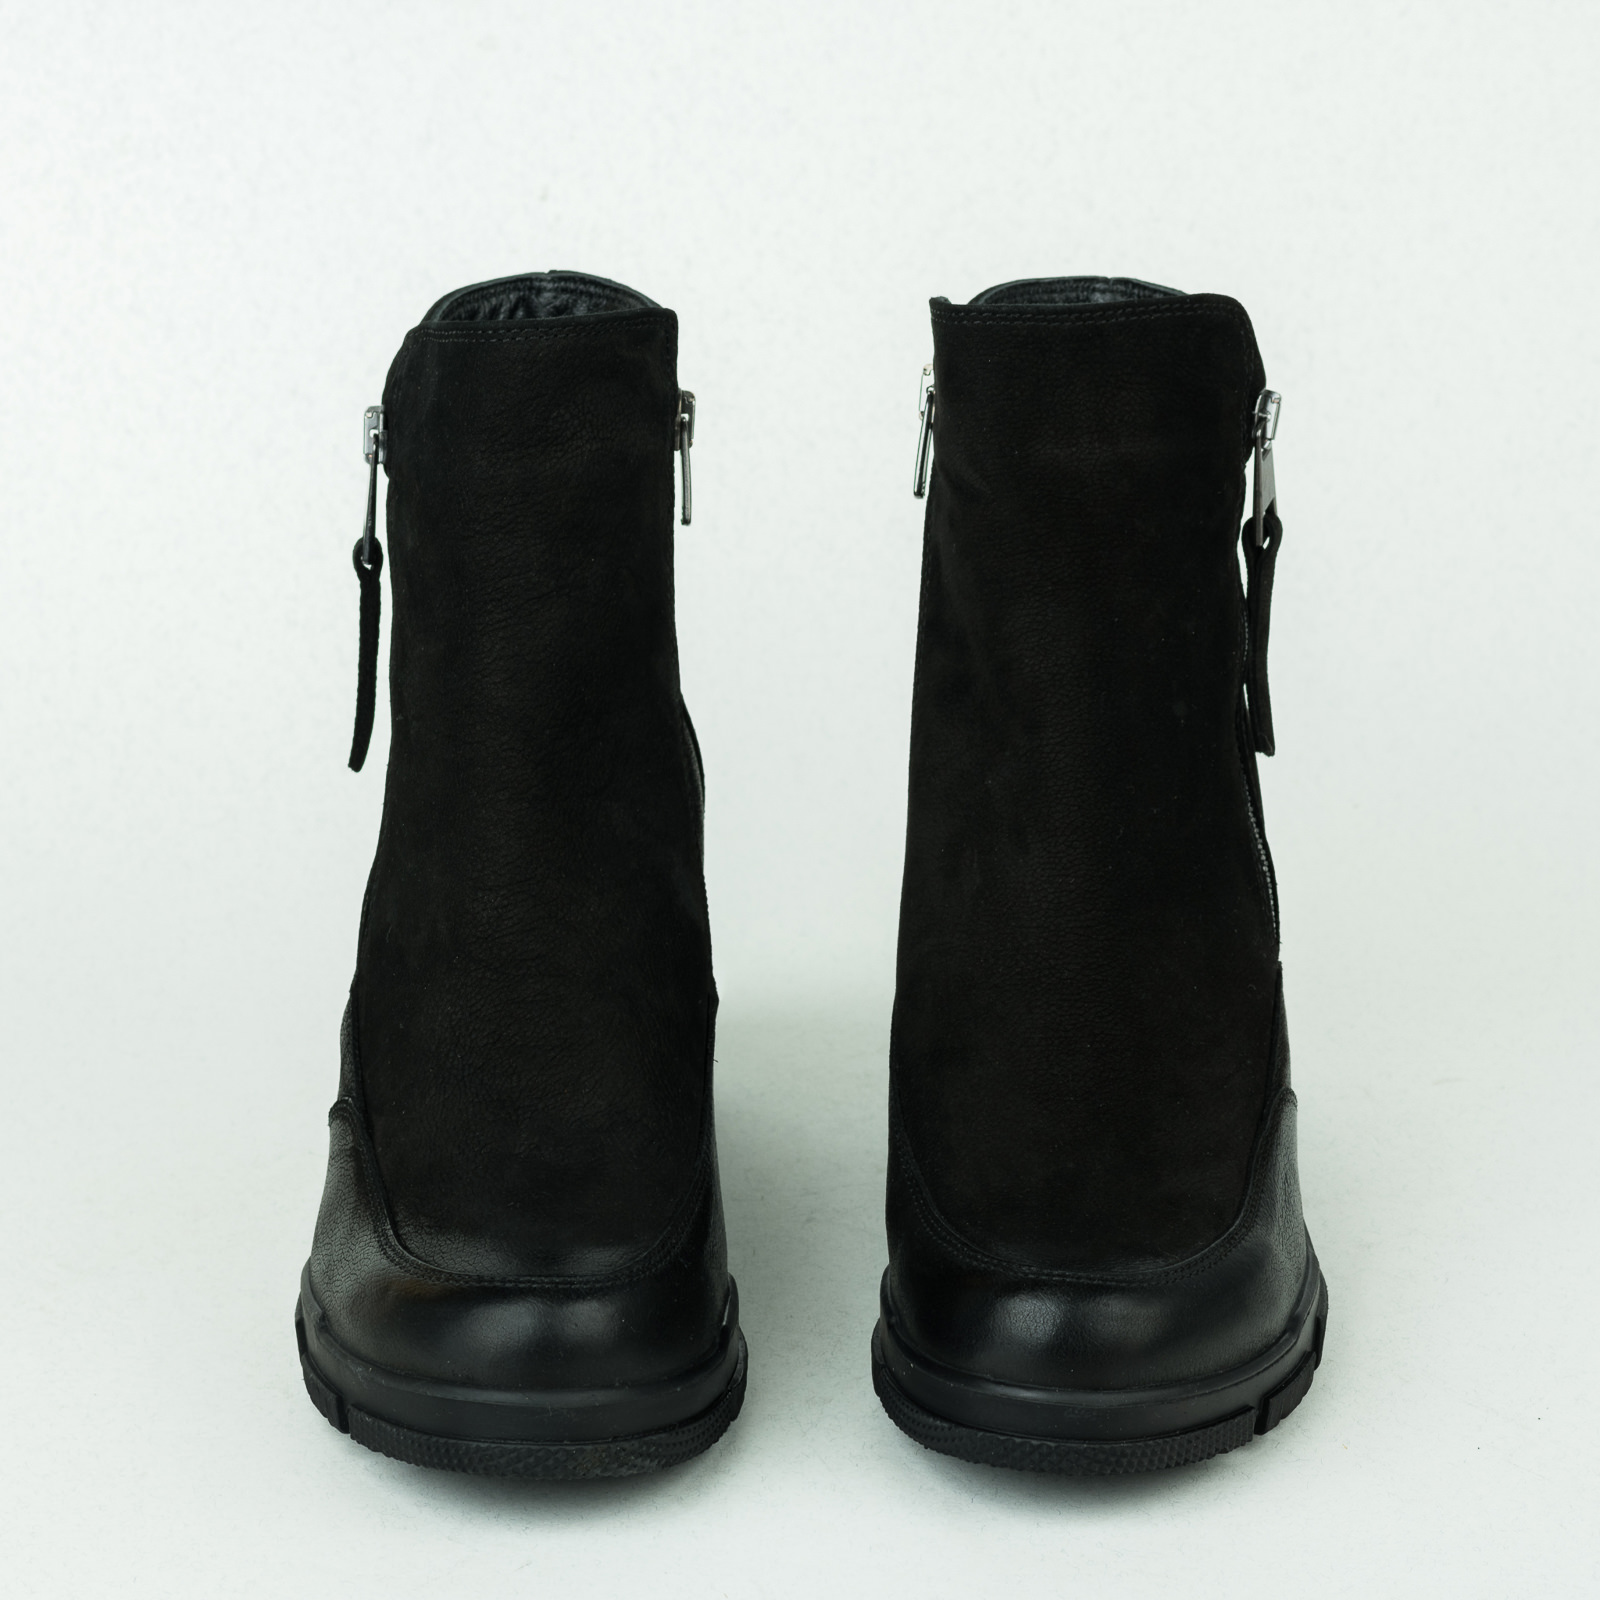 Leather ankle boots B350 - BLACK